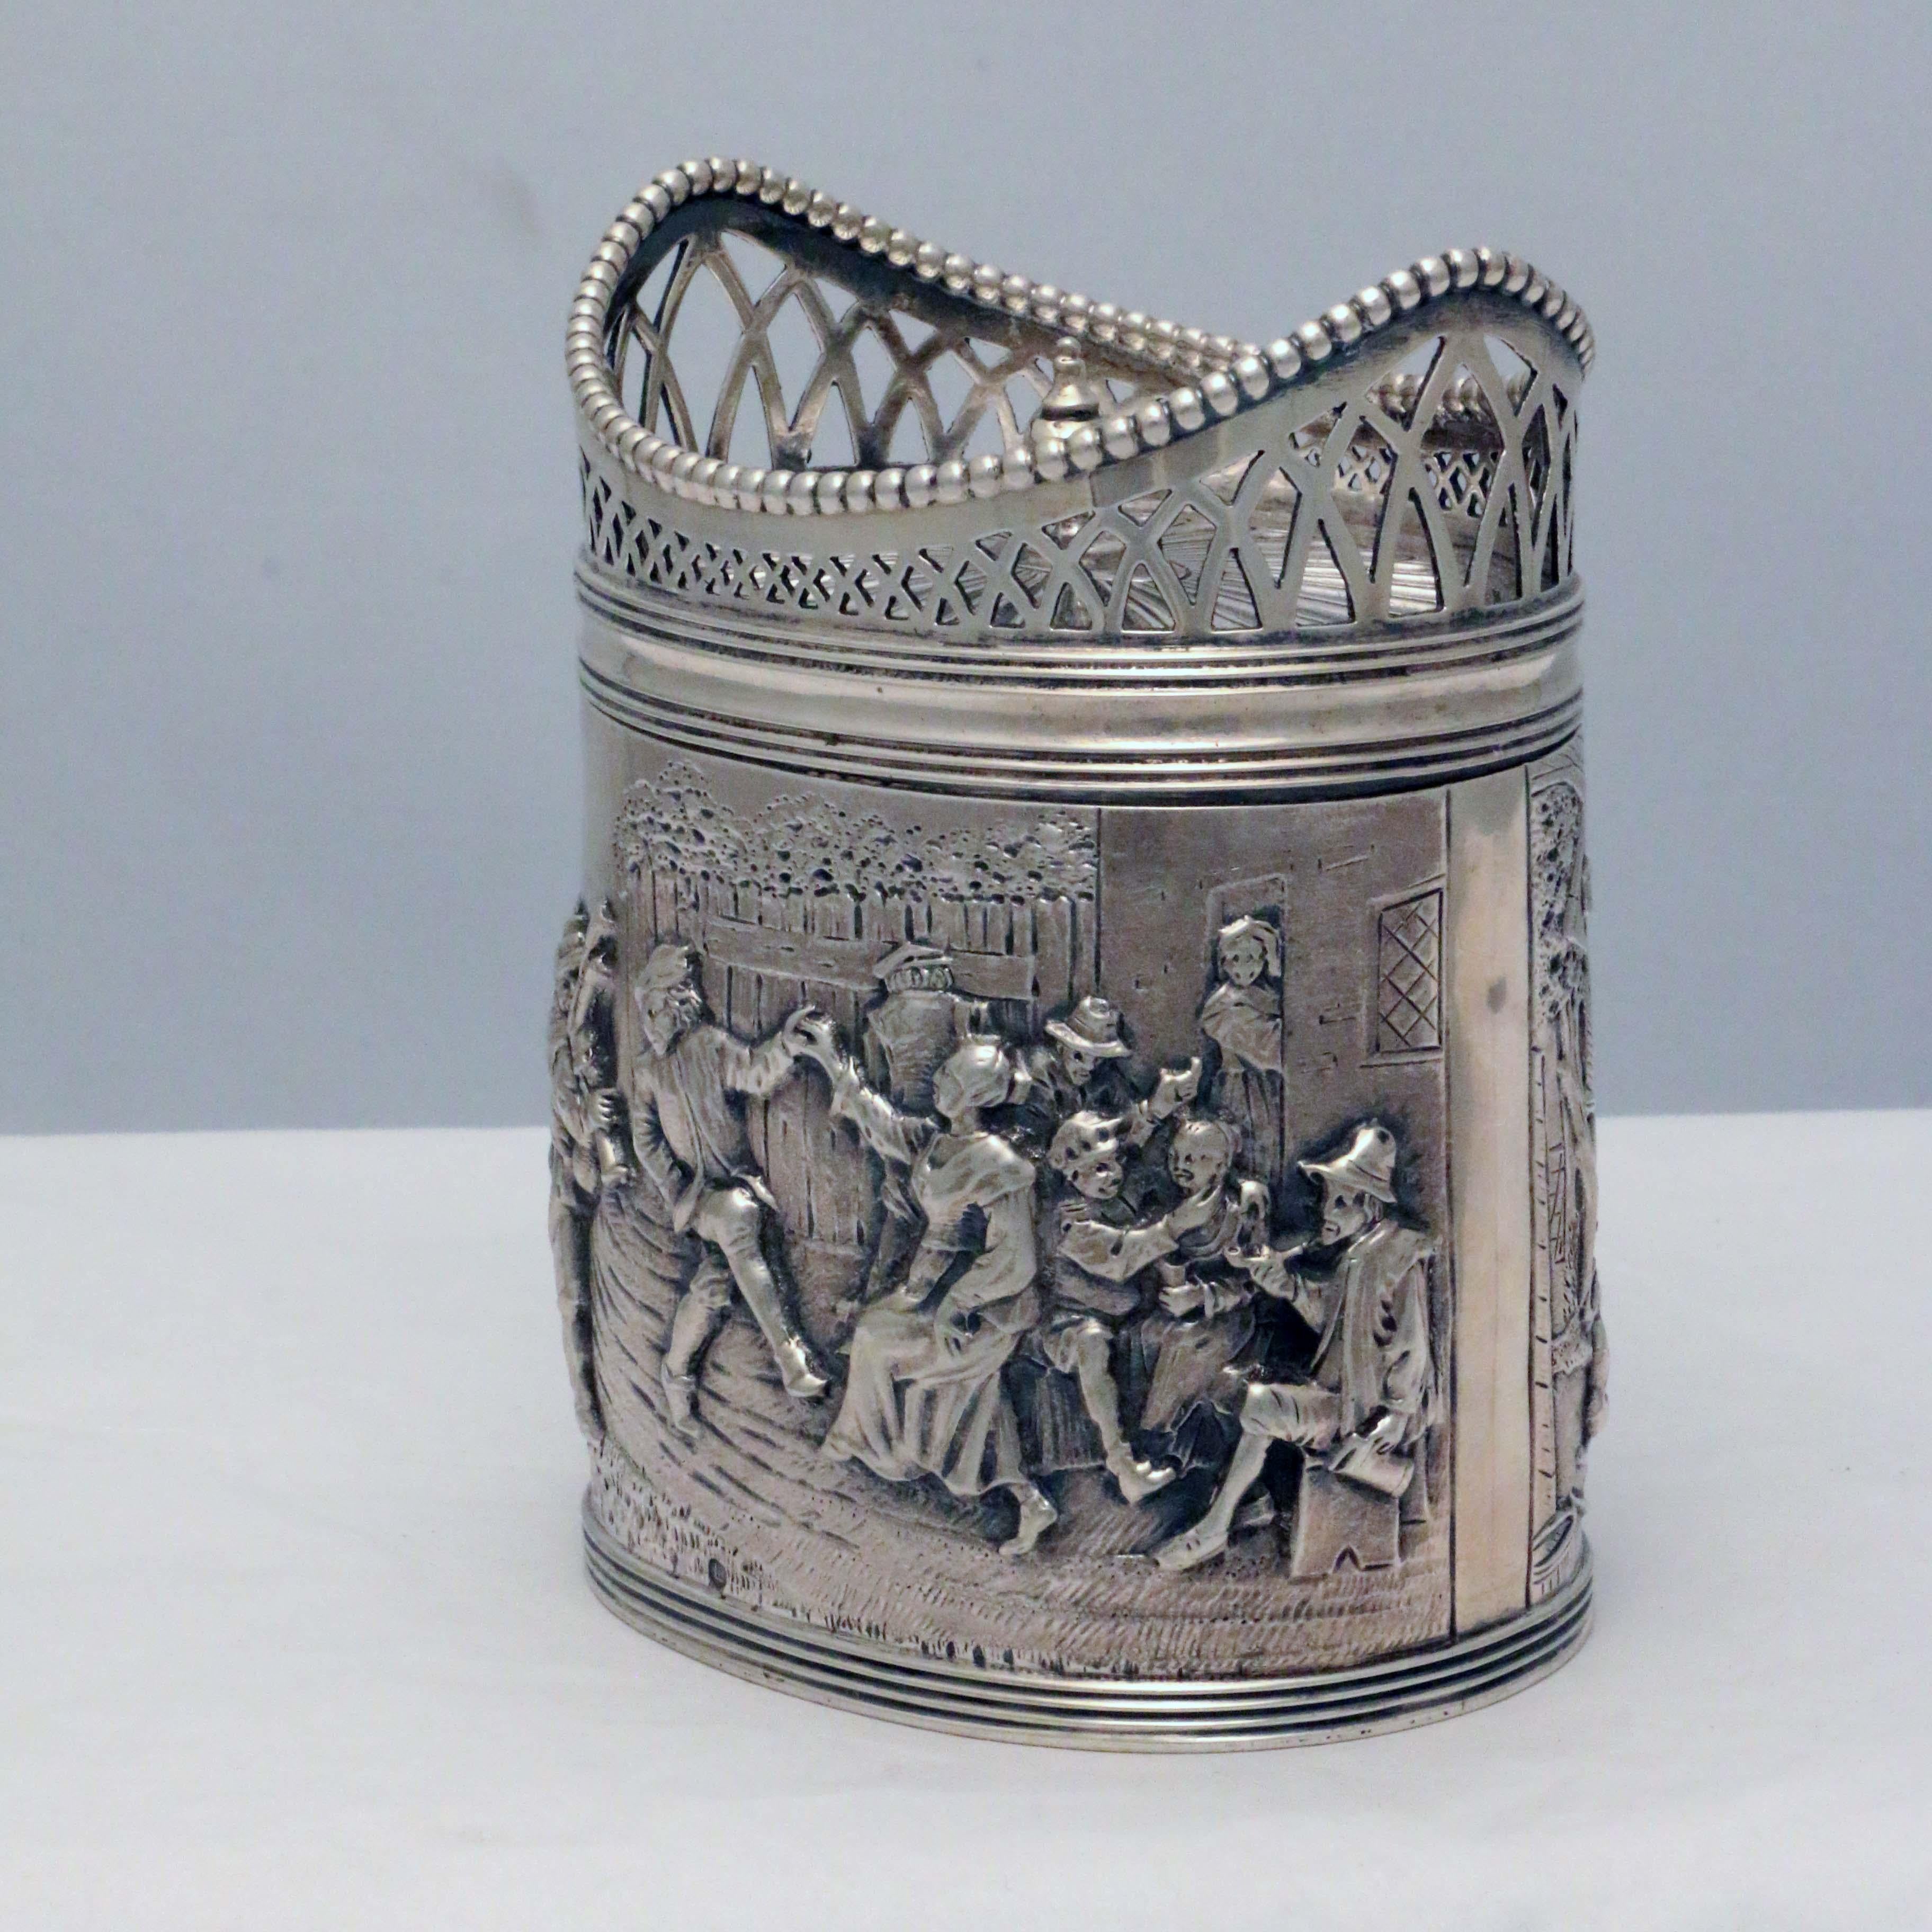 Of oval outline; the body repousse with scenes of merrymaking, after Teniers, the hinged cover with radiating design and pierced gallery. Very well-made, this is a cheerful Dutch box perfect for tisane, China tea, Indian tea or anything else herbal